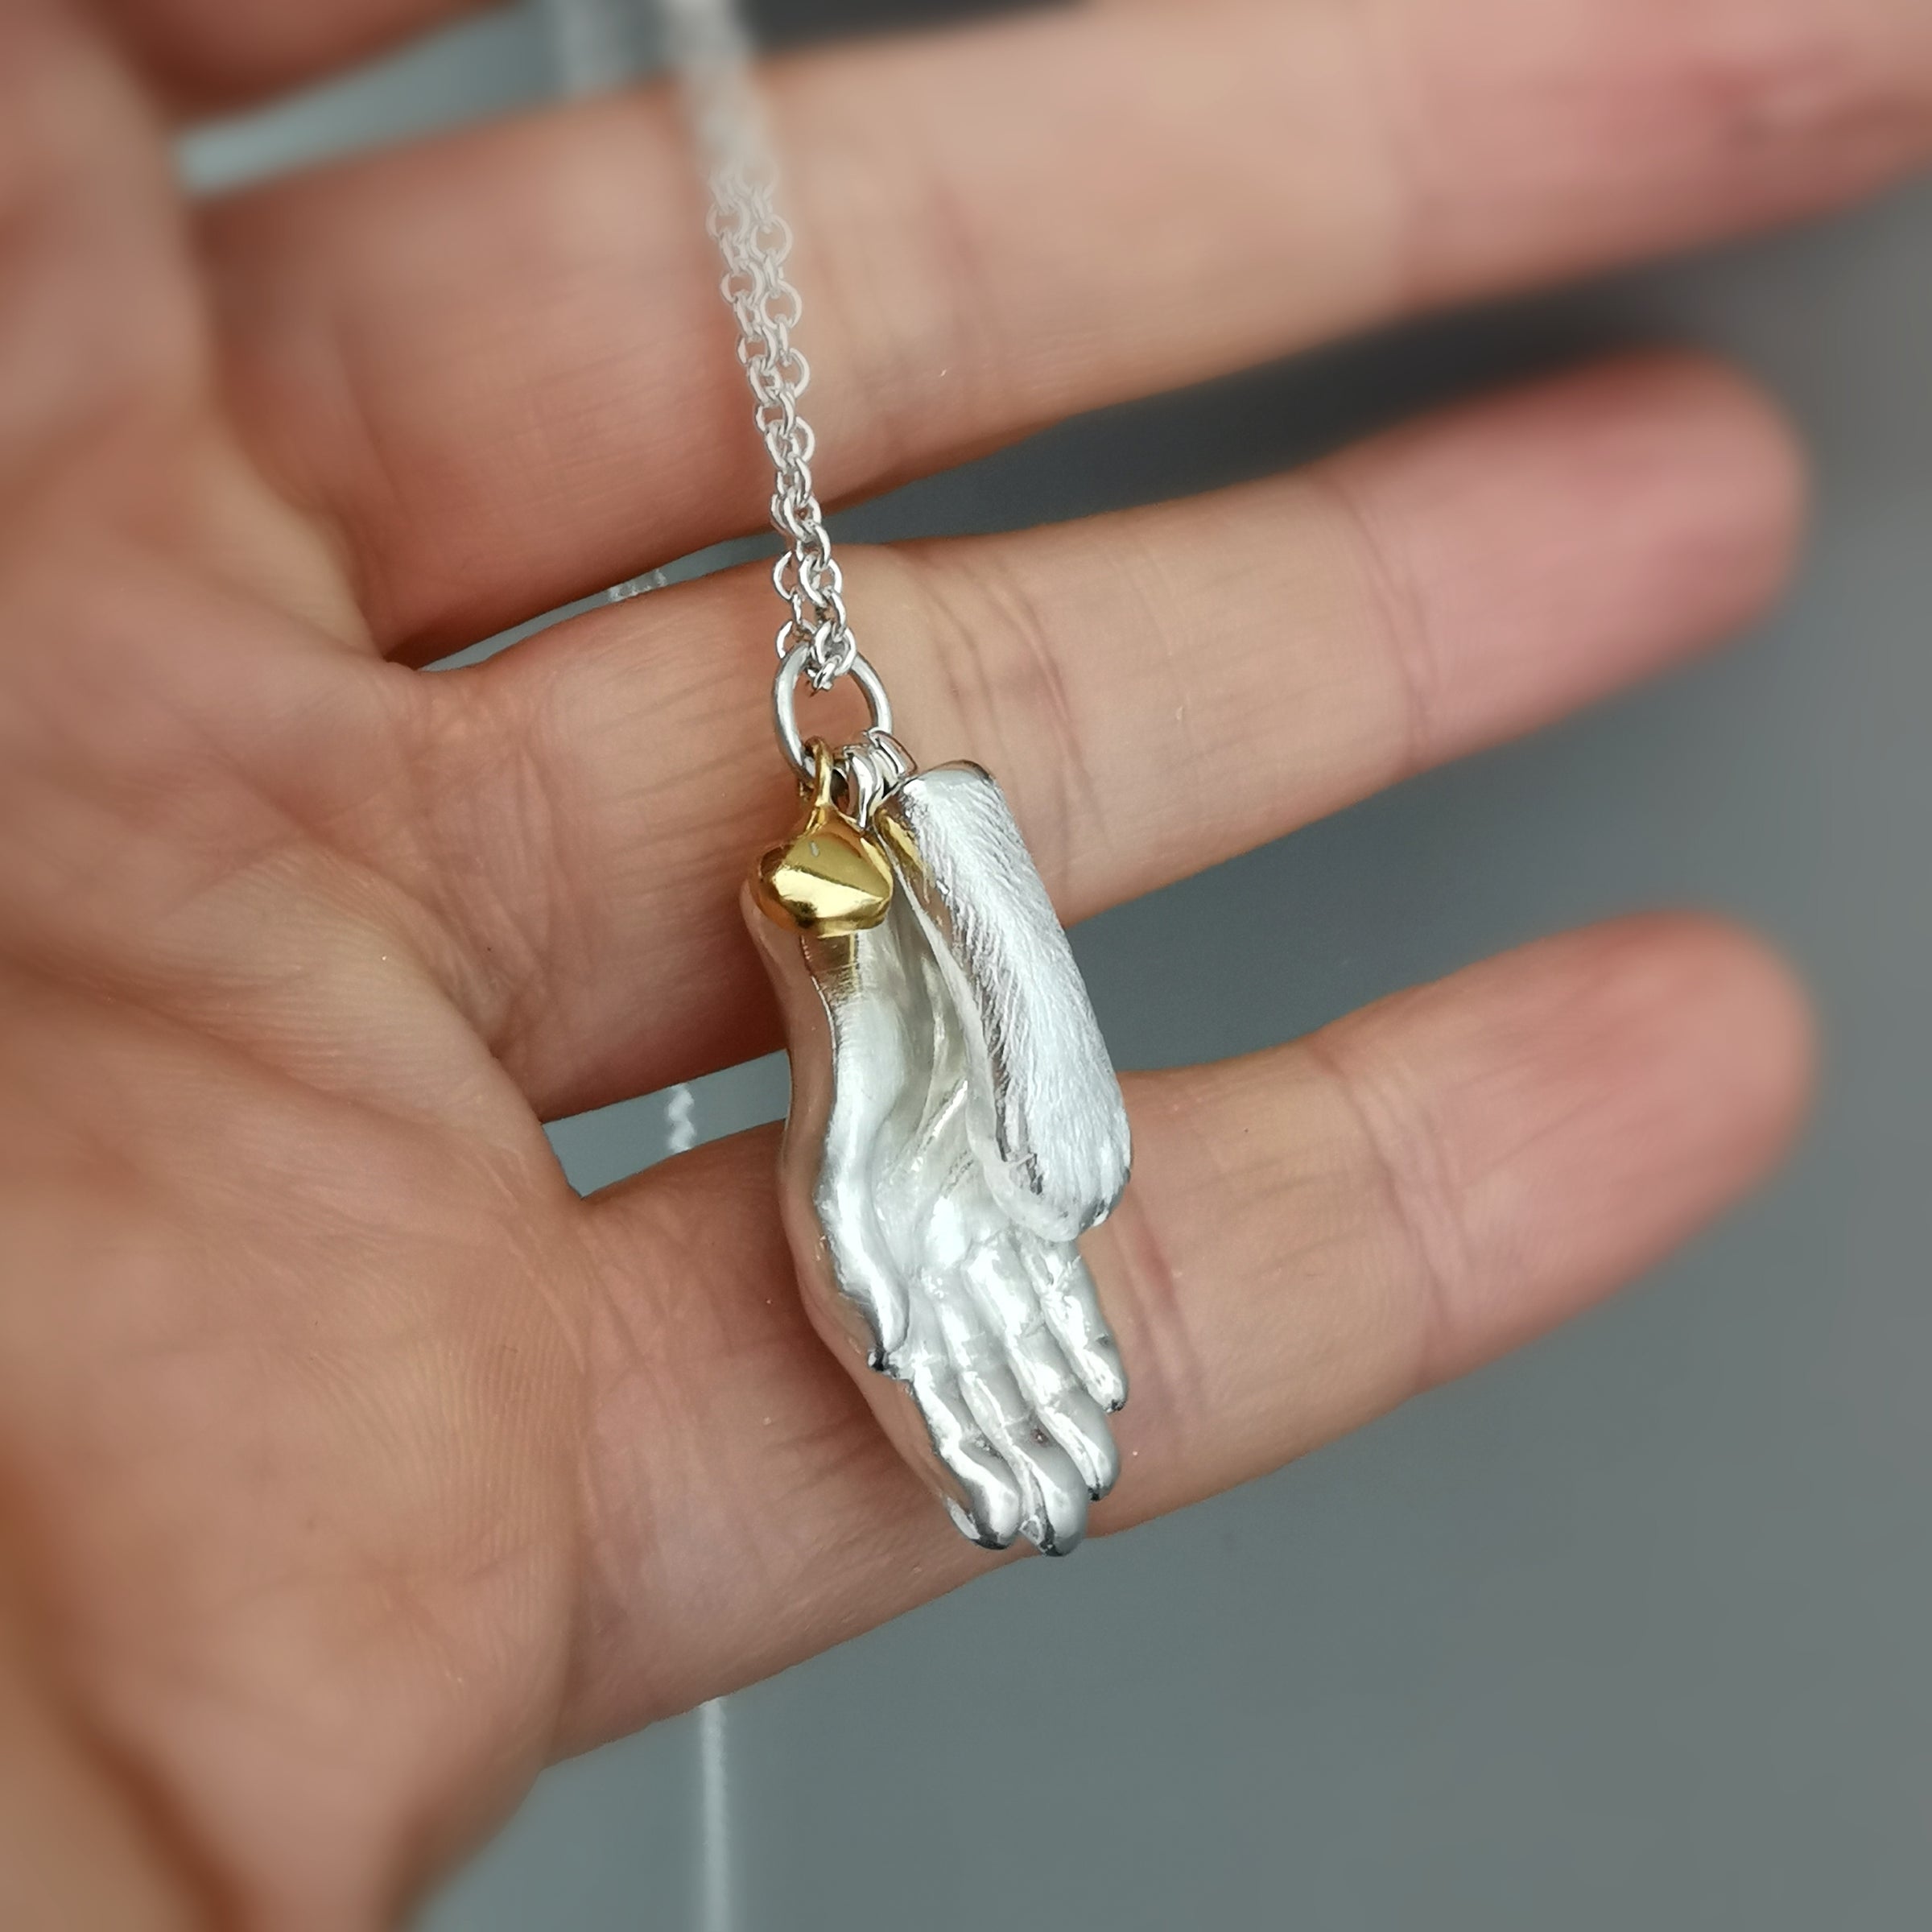 Gold Praying Hands Pendant Necklace Made Of 316L Stainless Steel | Classy  Men Collection